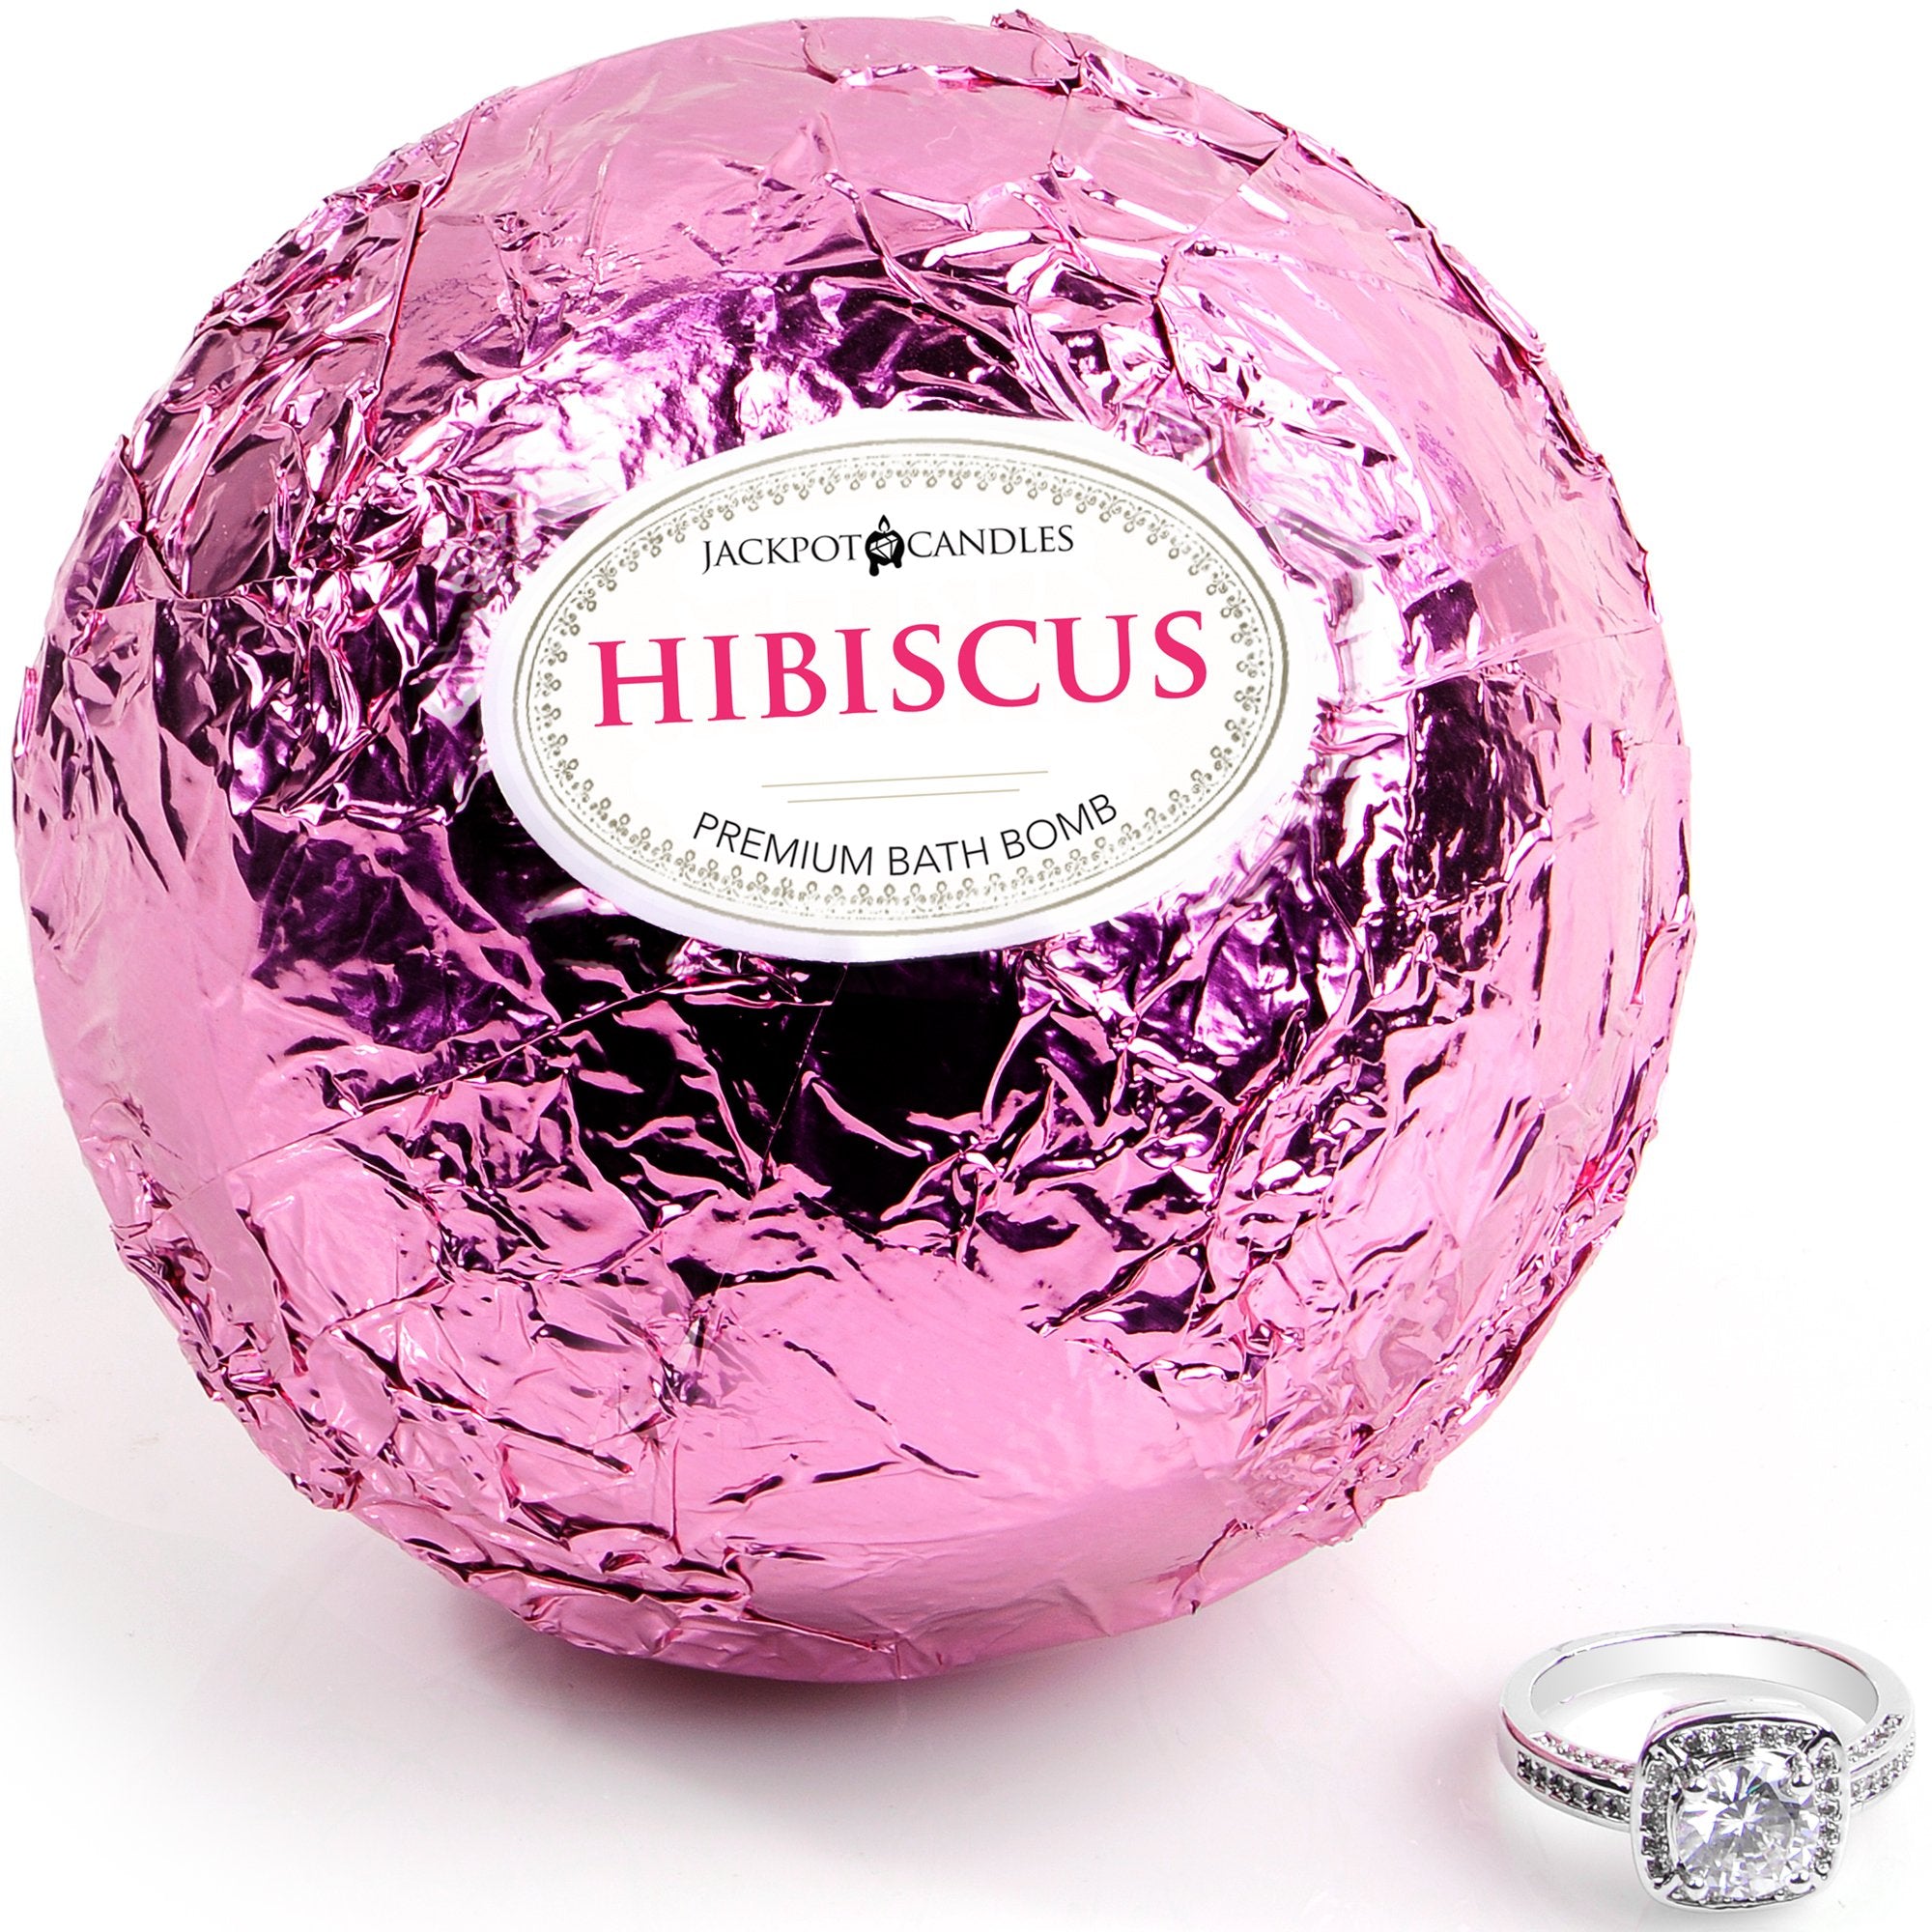 Hibiscus Bath Bomb with Jewelry Ring Inside